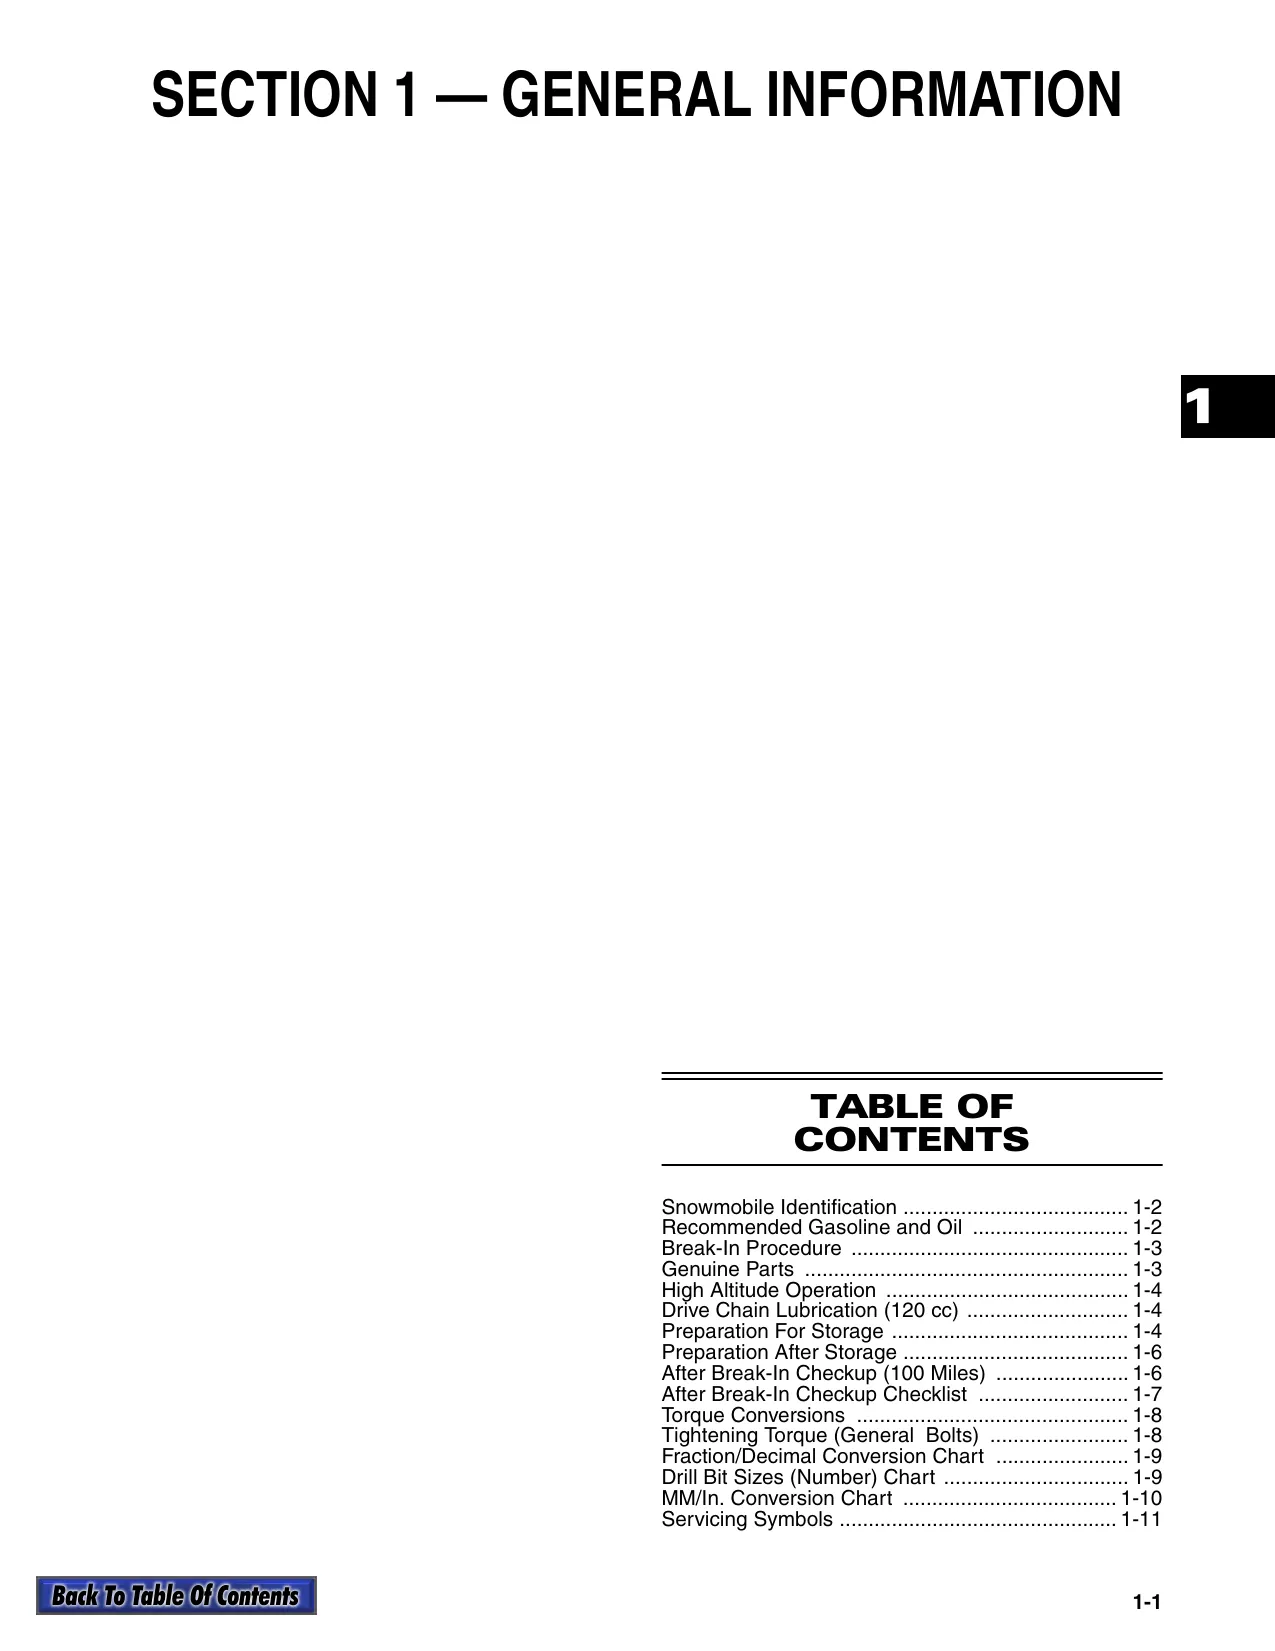 2002 Arctic Cat snowmobile service and shop manual